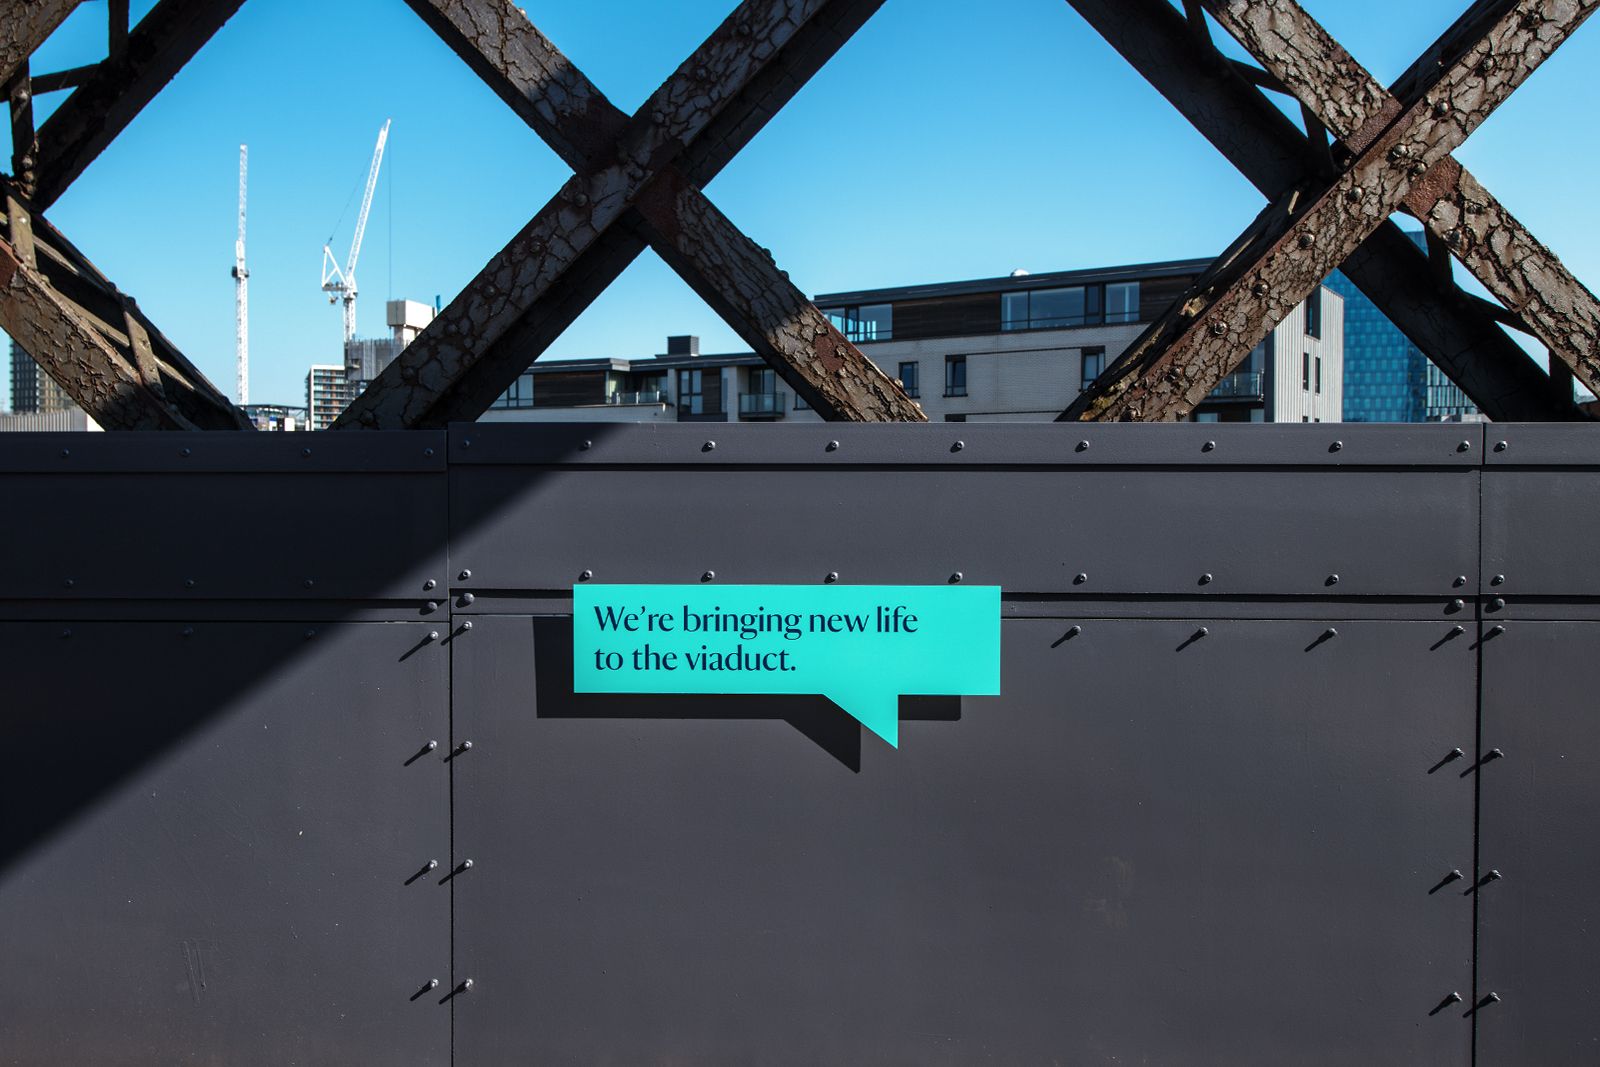 O Street Glasgow National Trust - Manchester Castlefield Viaduct branding. Teal speech bubble on industrial architecture with the text: We're bringing new life to the viaduct. Photography by Jill Jennings